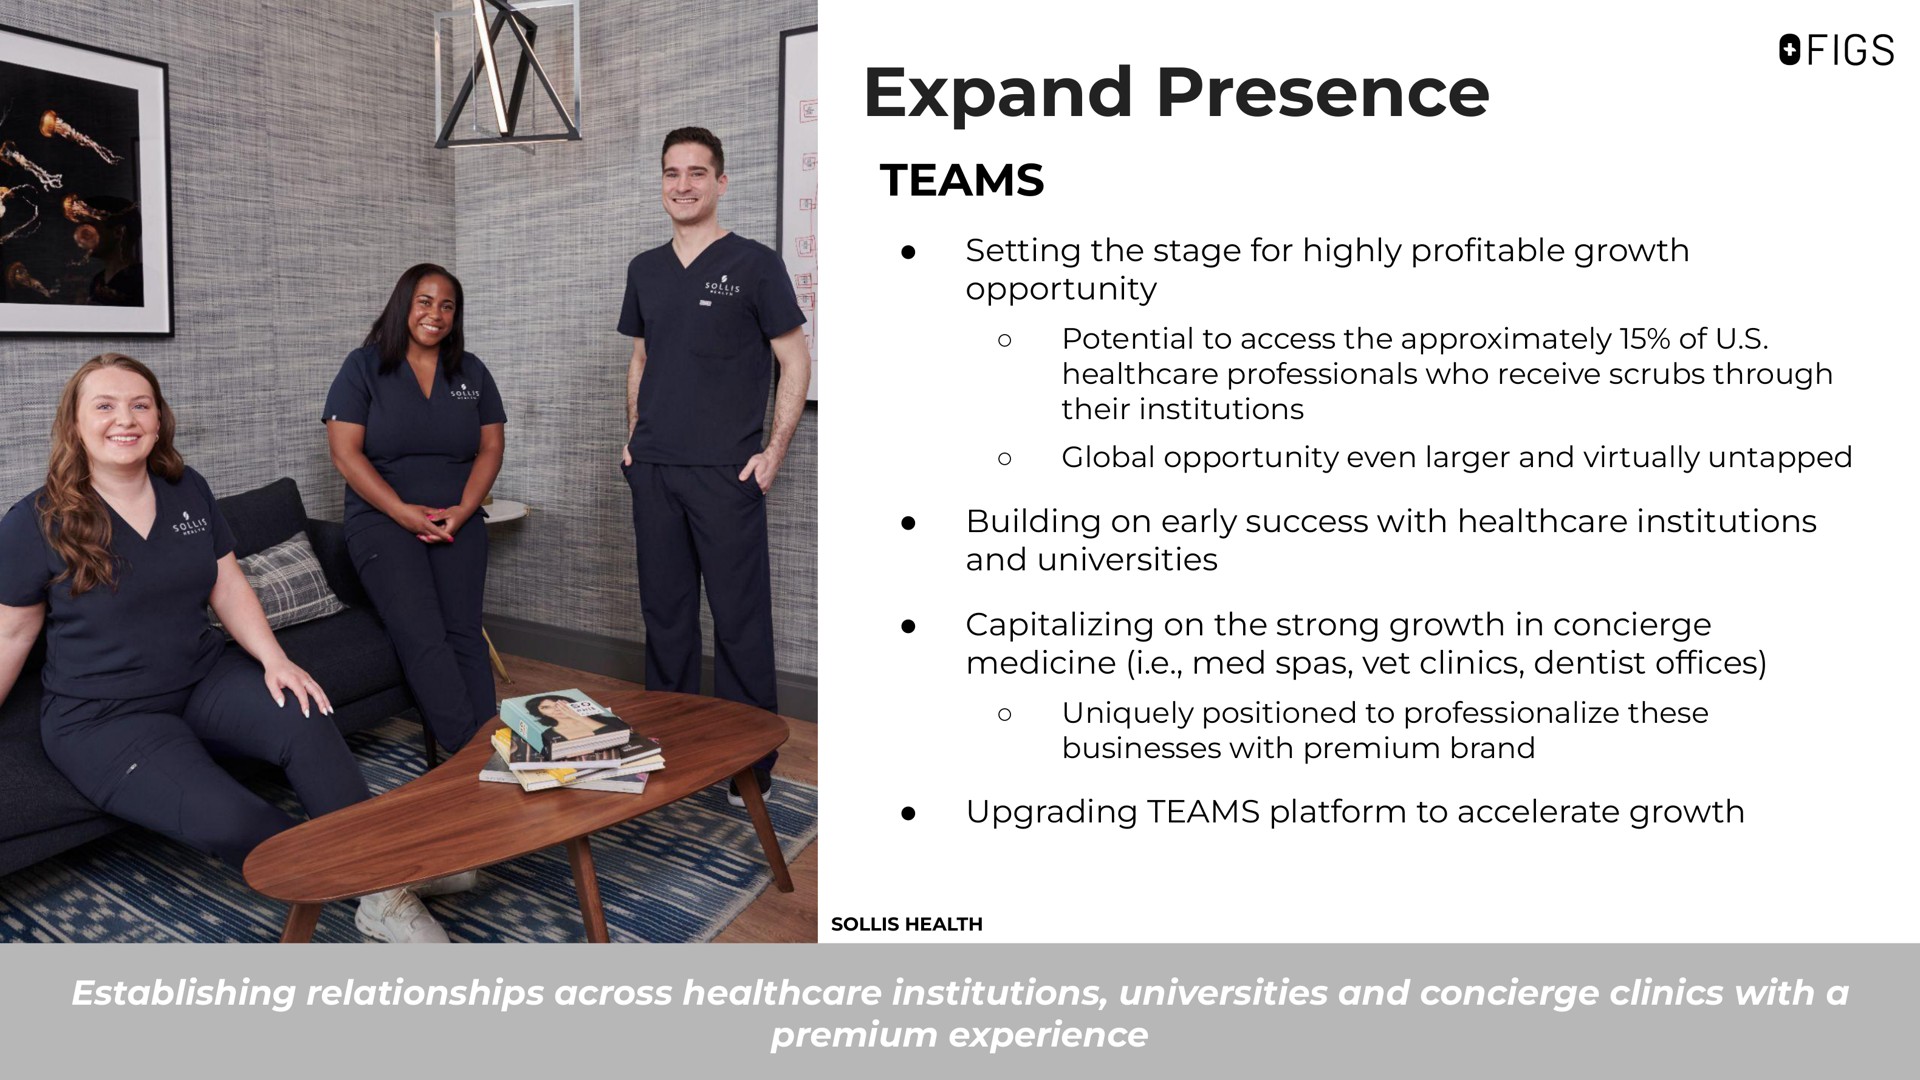 expand presence teams setting the stage for highly profitable growth opportunity potential to access the approximately of professionals who receive scrubs through their institutions global opportunity even and virtually untapped building on early success with institutions and universities capitalizing on the strong growth in concierge medicine i spas vet clinics dentist offices uniquely positioned to professionalize these businesses with premium brand upgrading teams platform to accelerate growth | FIGS